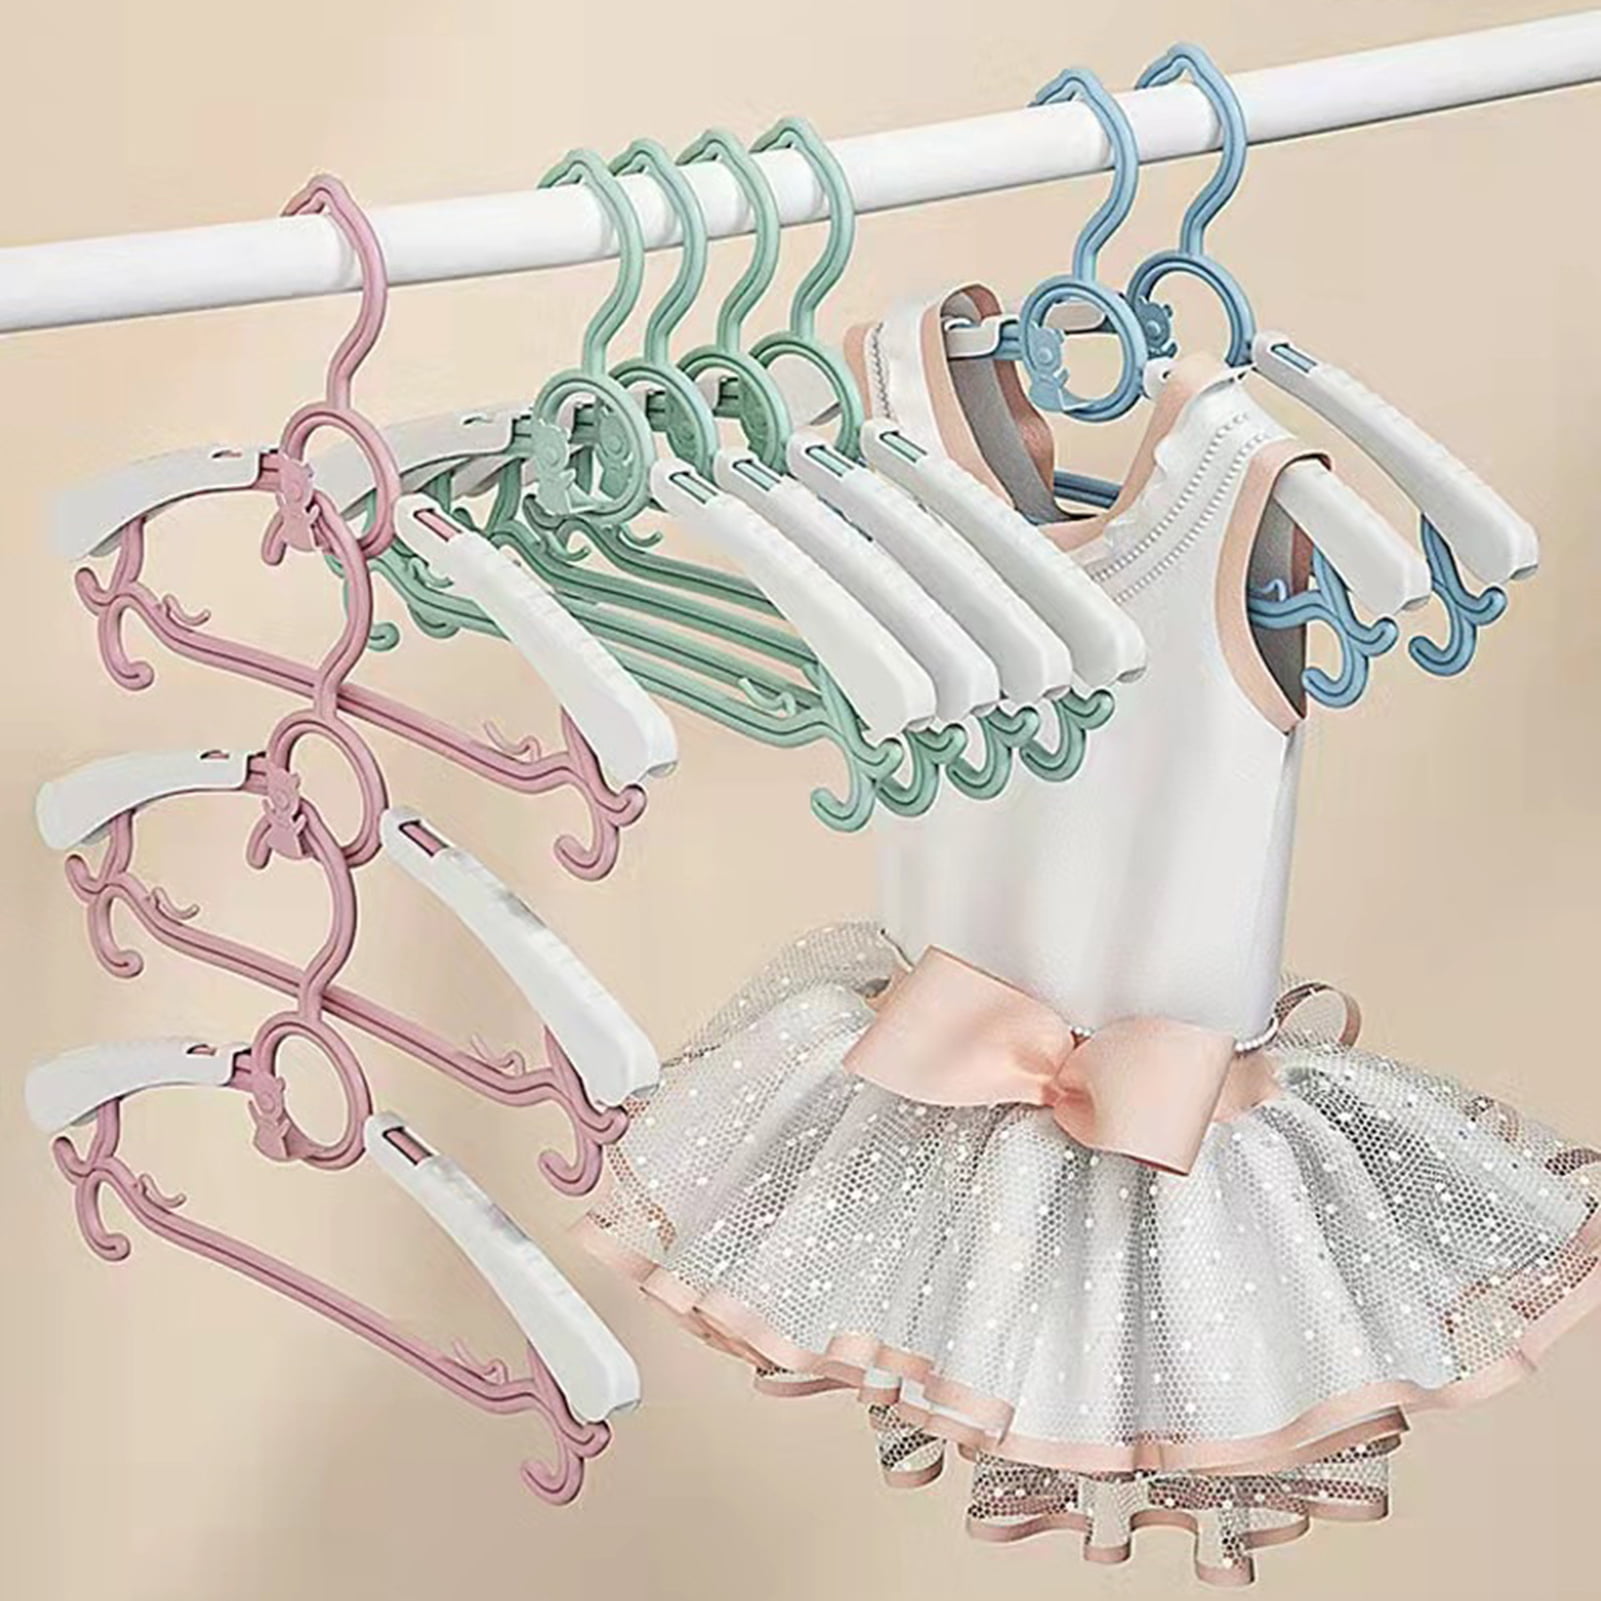 Baby Clothing Hangers - 10 Piece Set – The Diapered Baby